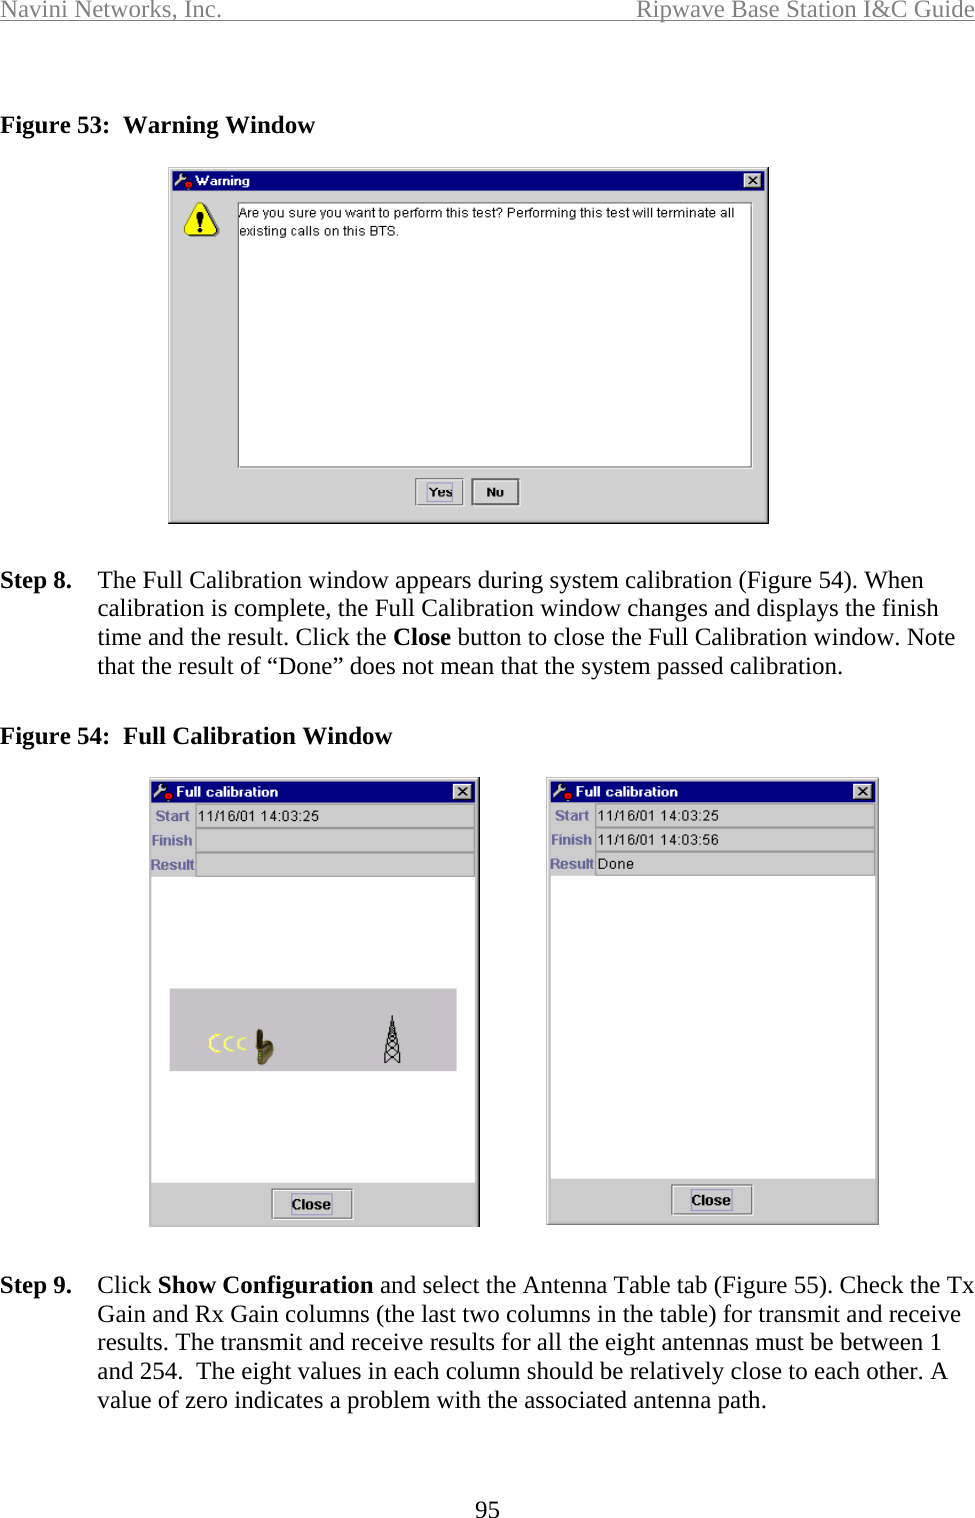 Navini Networks, Inc.  Ripwave Base Station I&amp;C Guide  95  Figure 53:  Warning Window  Step 8.  The Full Calibration window appears during system calibration (Figure 54). When calibration is complete, the Full Calibration window changes and displays the finish time and the result. Click the Close button to close the Full Calibration window. Note that the result of “Done” does not mean that the system passed calibration.  Figure 54:  Full Calibration Window  Step 9.  Click Show Configuration and select the Antenna Table tab (Figure 55). Check the Tx Gain and Rx Gain columns (the last two columns in the table) for transmit and receive results. The transmit and receive results for all the eight antennas must be between 1 and 254.  The eight values in each column should be relatively close to each other. A value of zero indicates a problem with the associated antenna path.  